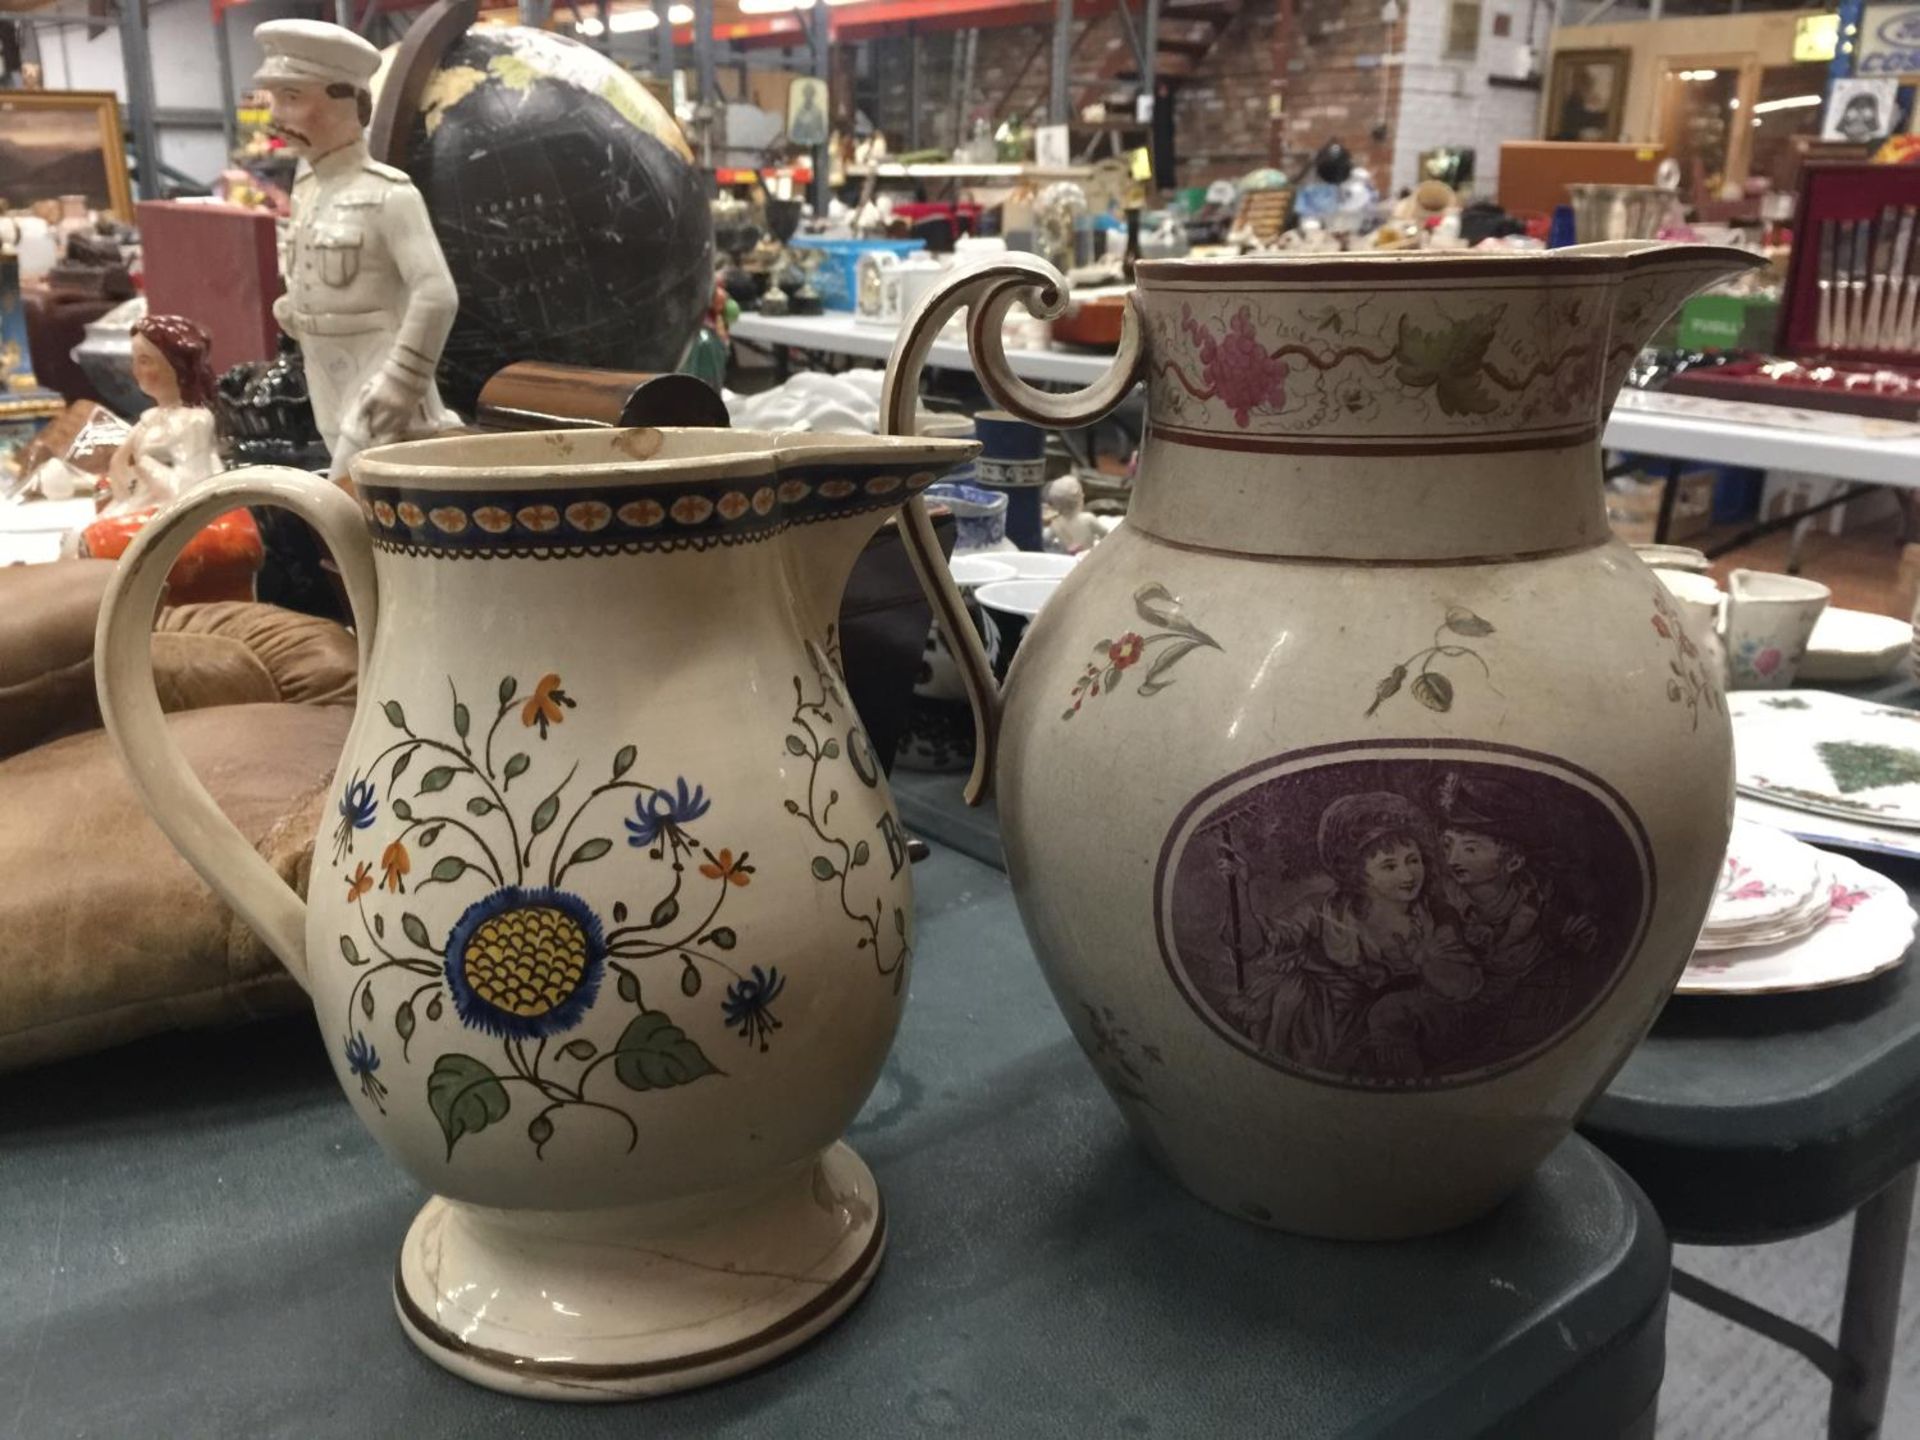 TWO VINTAGE JUGS, ONE 'GEORGE BUTLER' - A/F, THE OTHER A LARGE VICTORIAN TRANSFER PRINTED - A/F